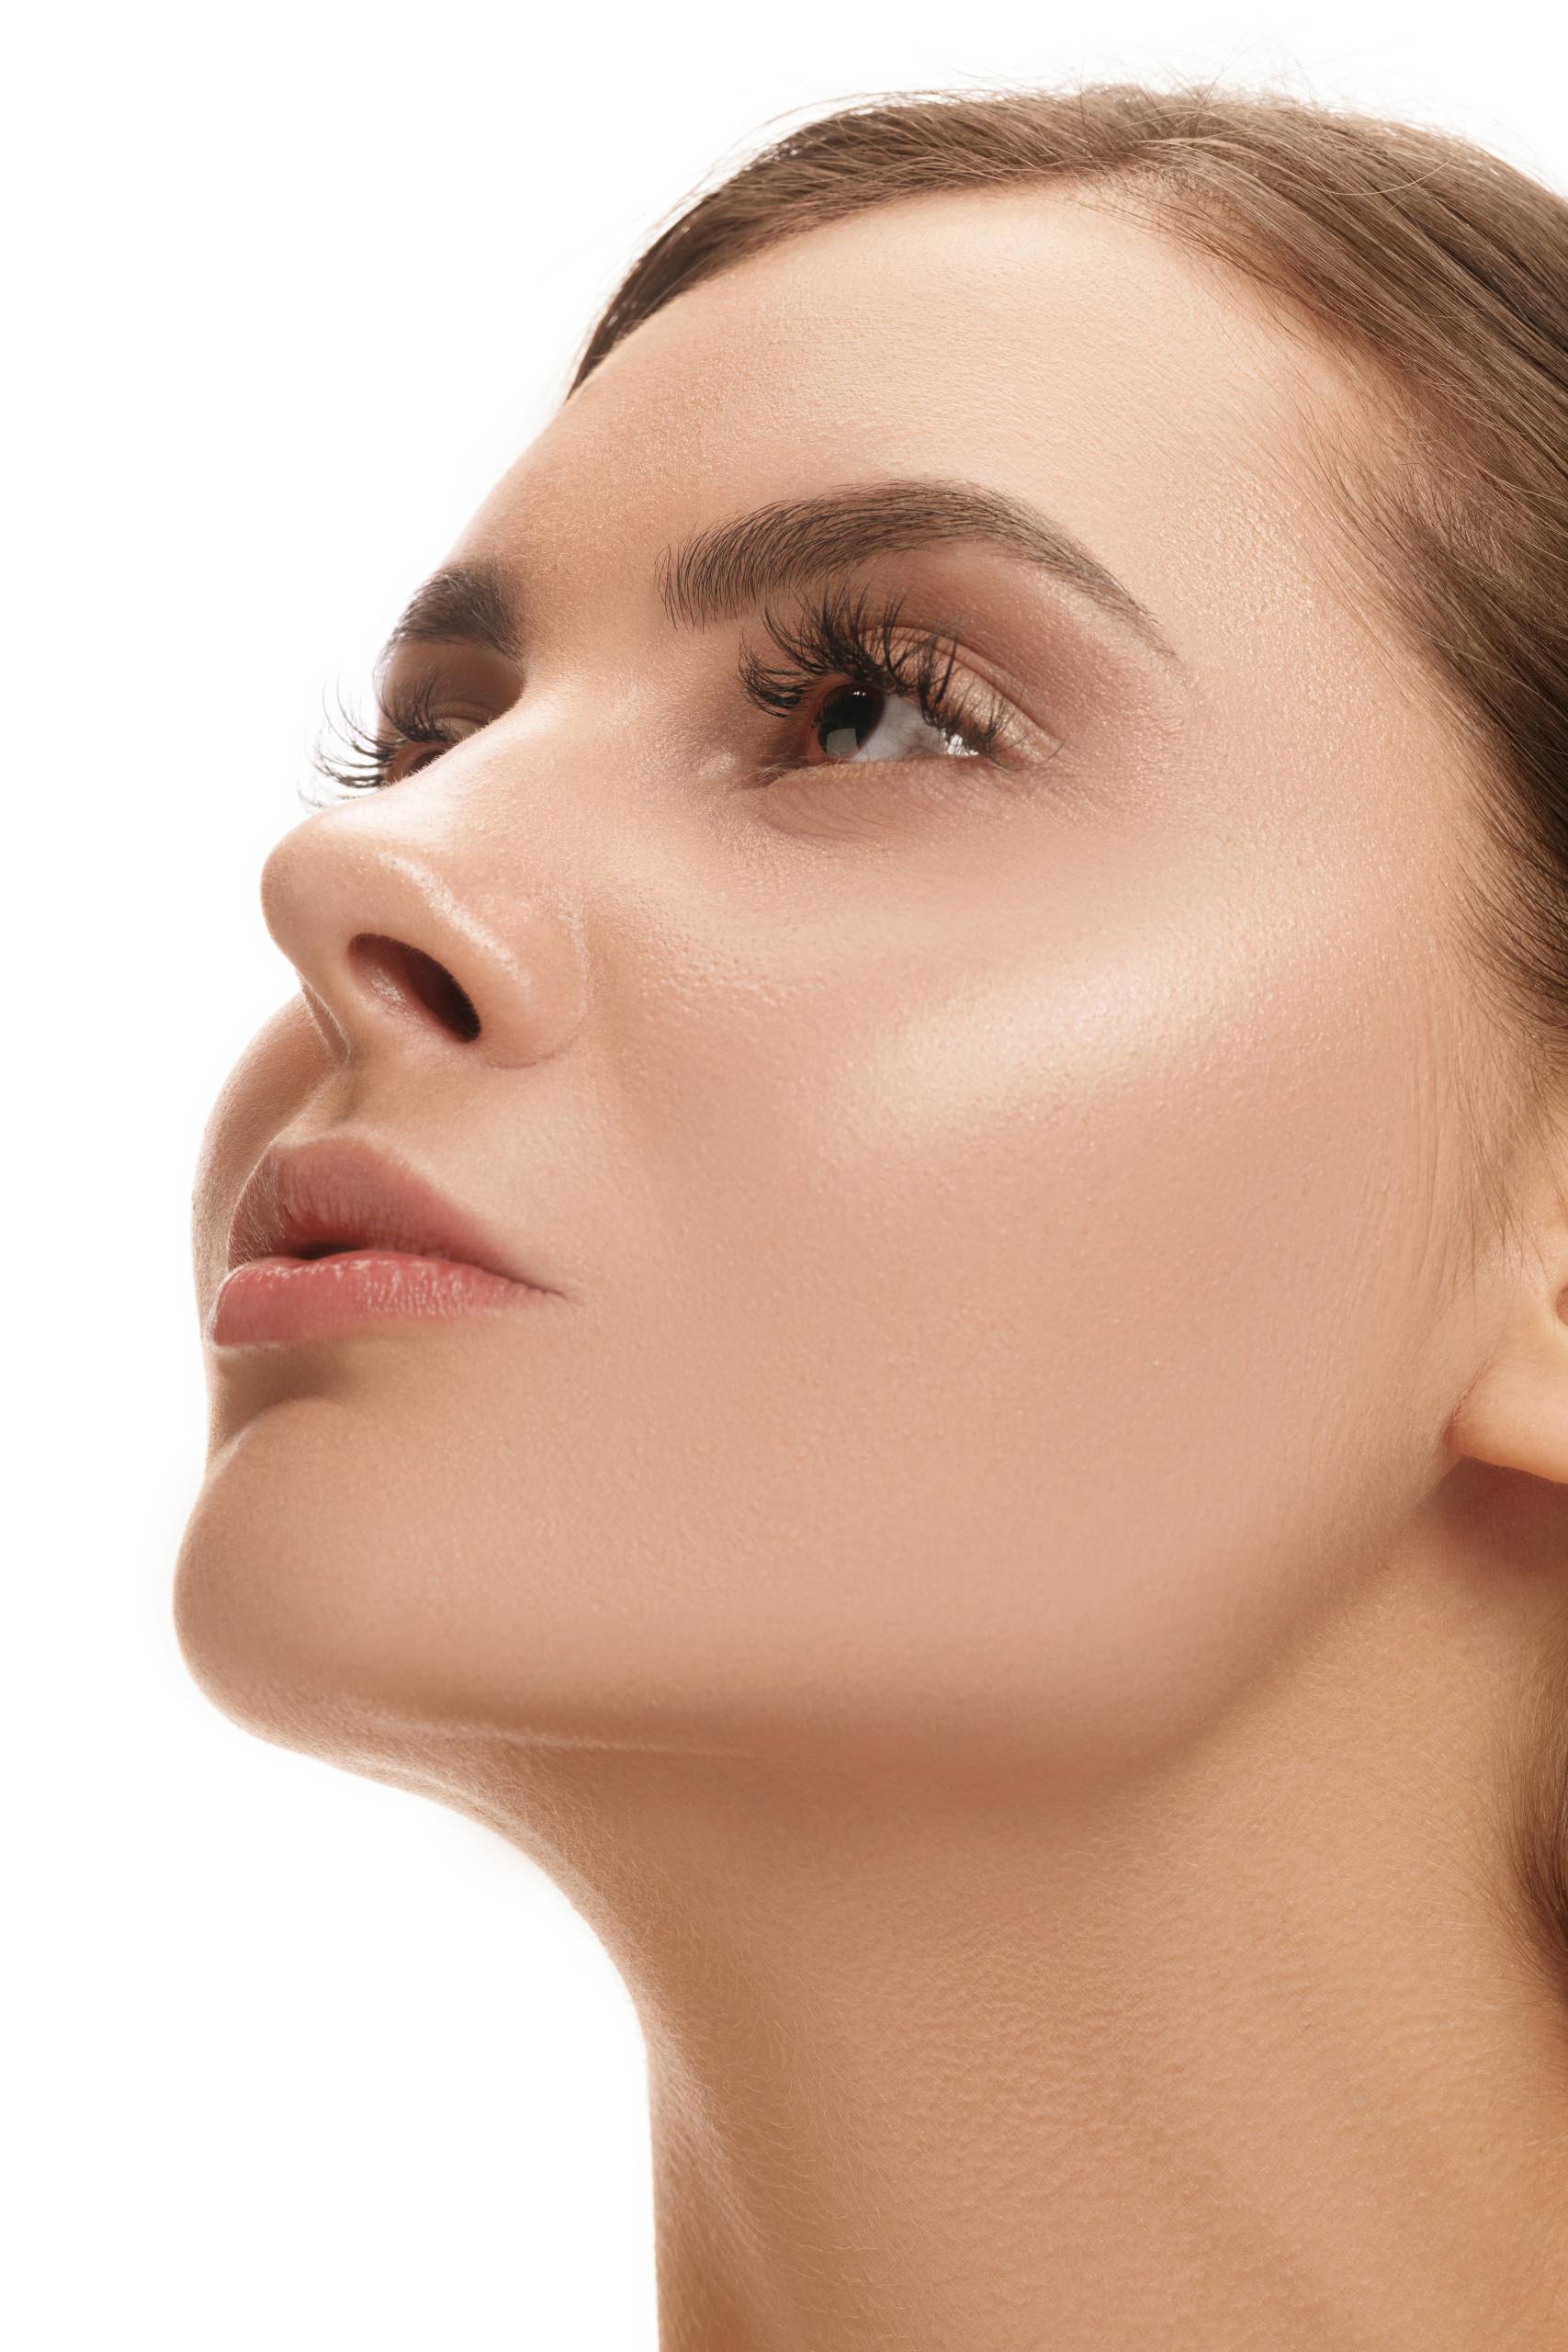 What are the Differences Between Ultrasonic Rhinoplasty and Traditional Rhinoplasty?